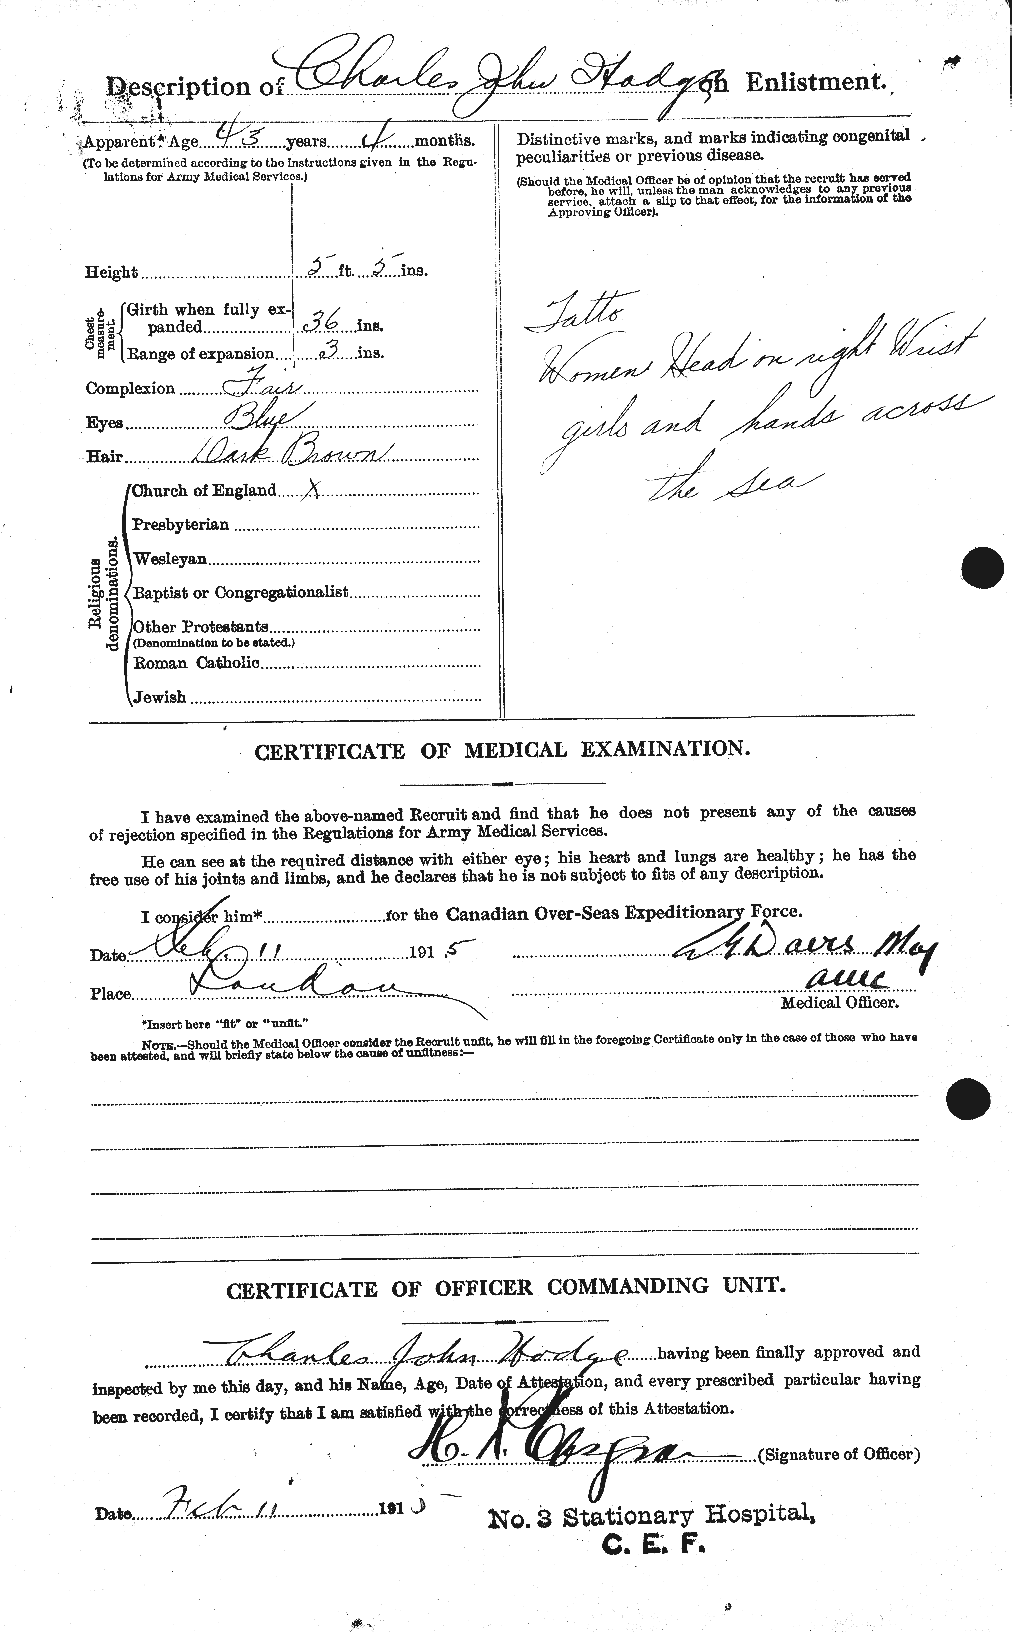 Personnel Records of the First World War - CEF 397833b